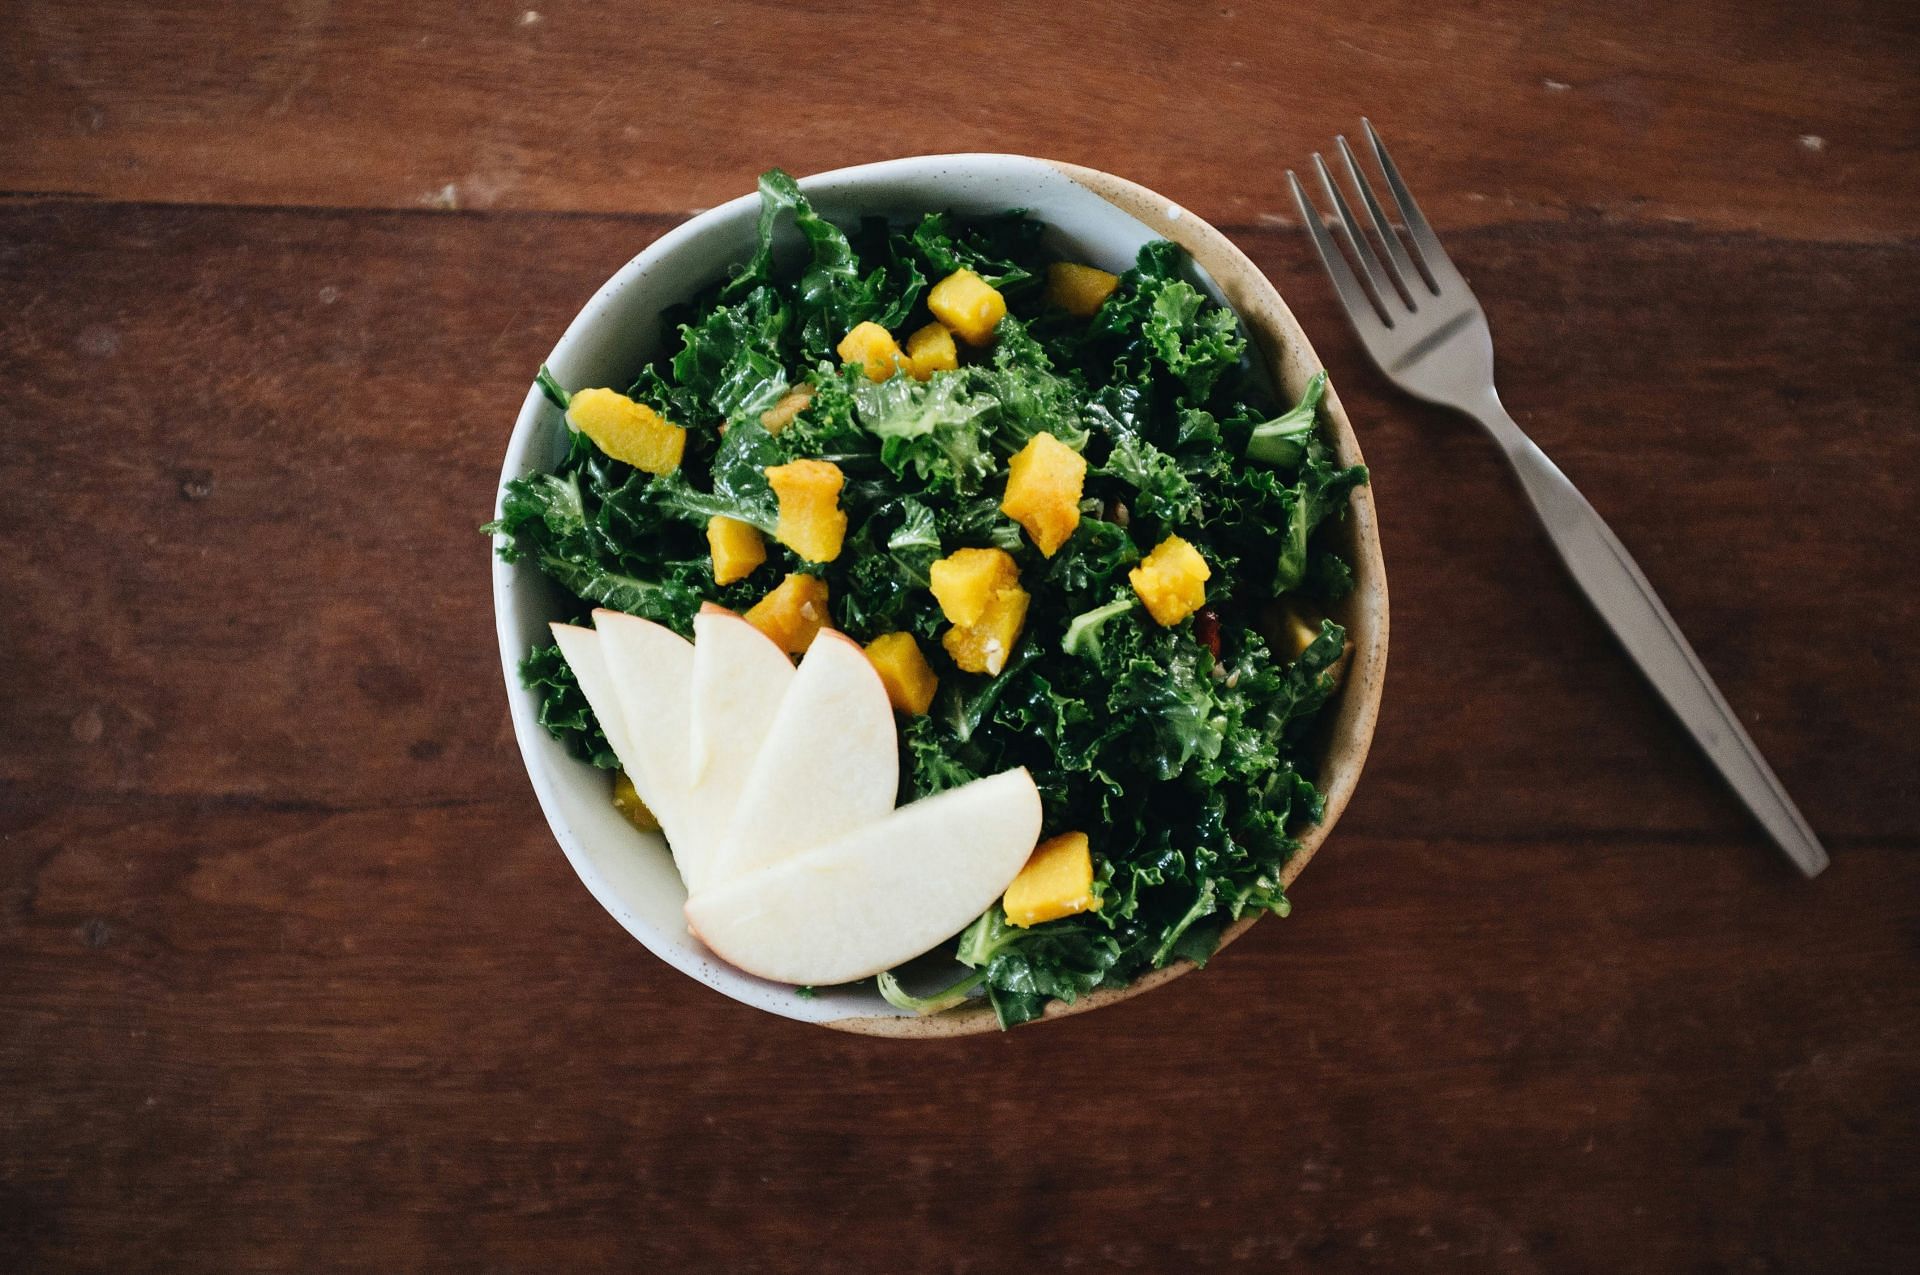 Leafy greens are a good source of B9. (Image by Cole Patrick/Unsplash)